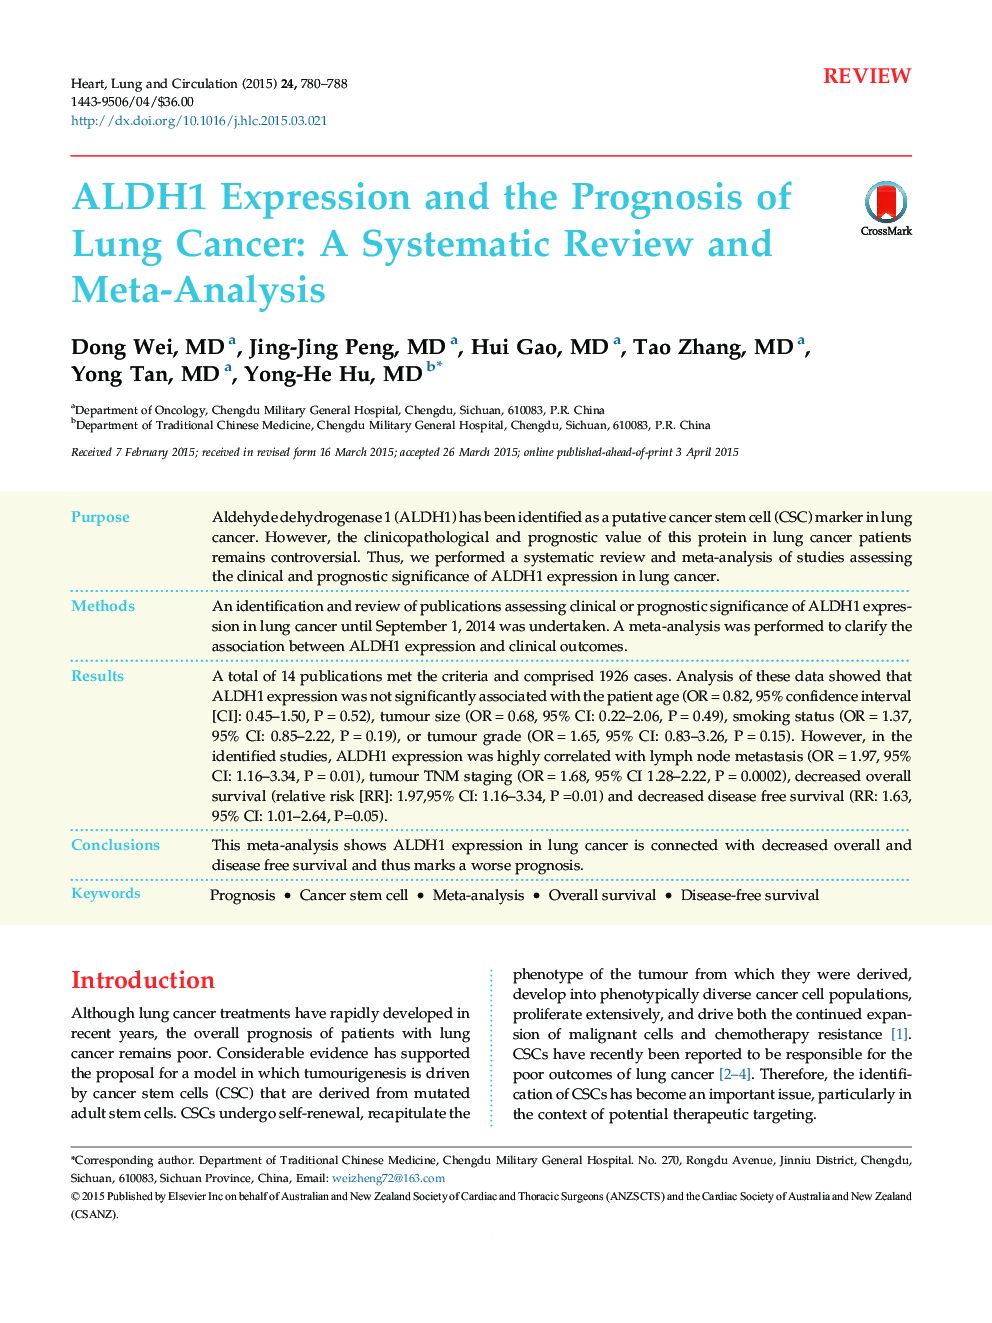 ALDH1 Expression and the Prognosis of Lung Cancer: A Systematic Review and Meta-Analysis